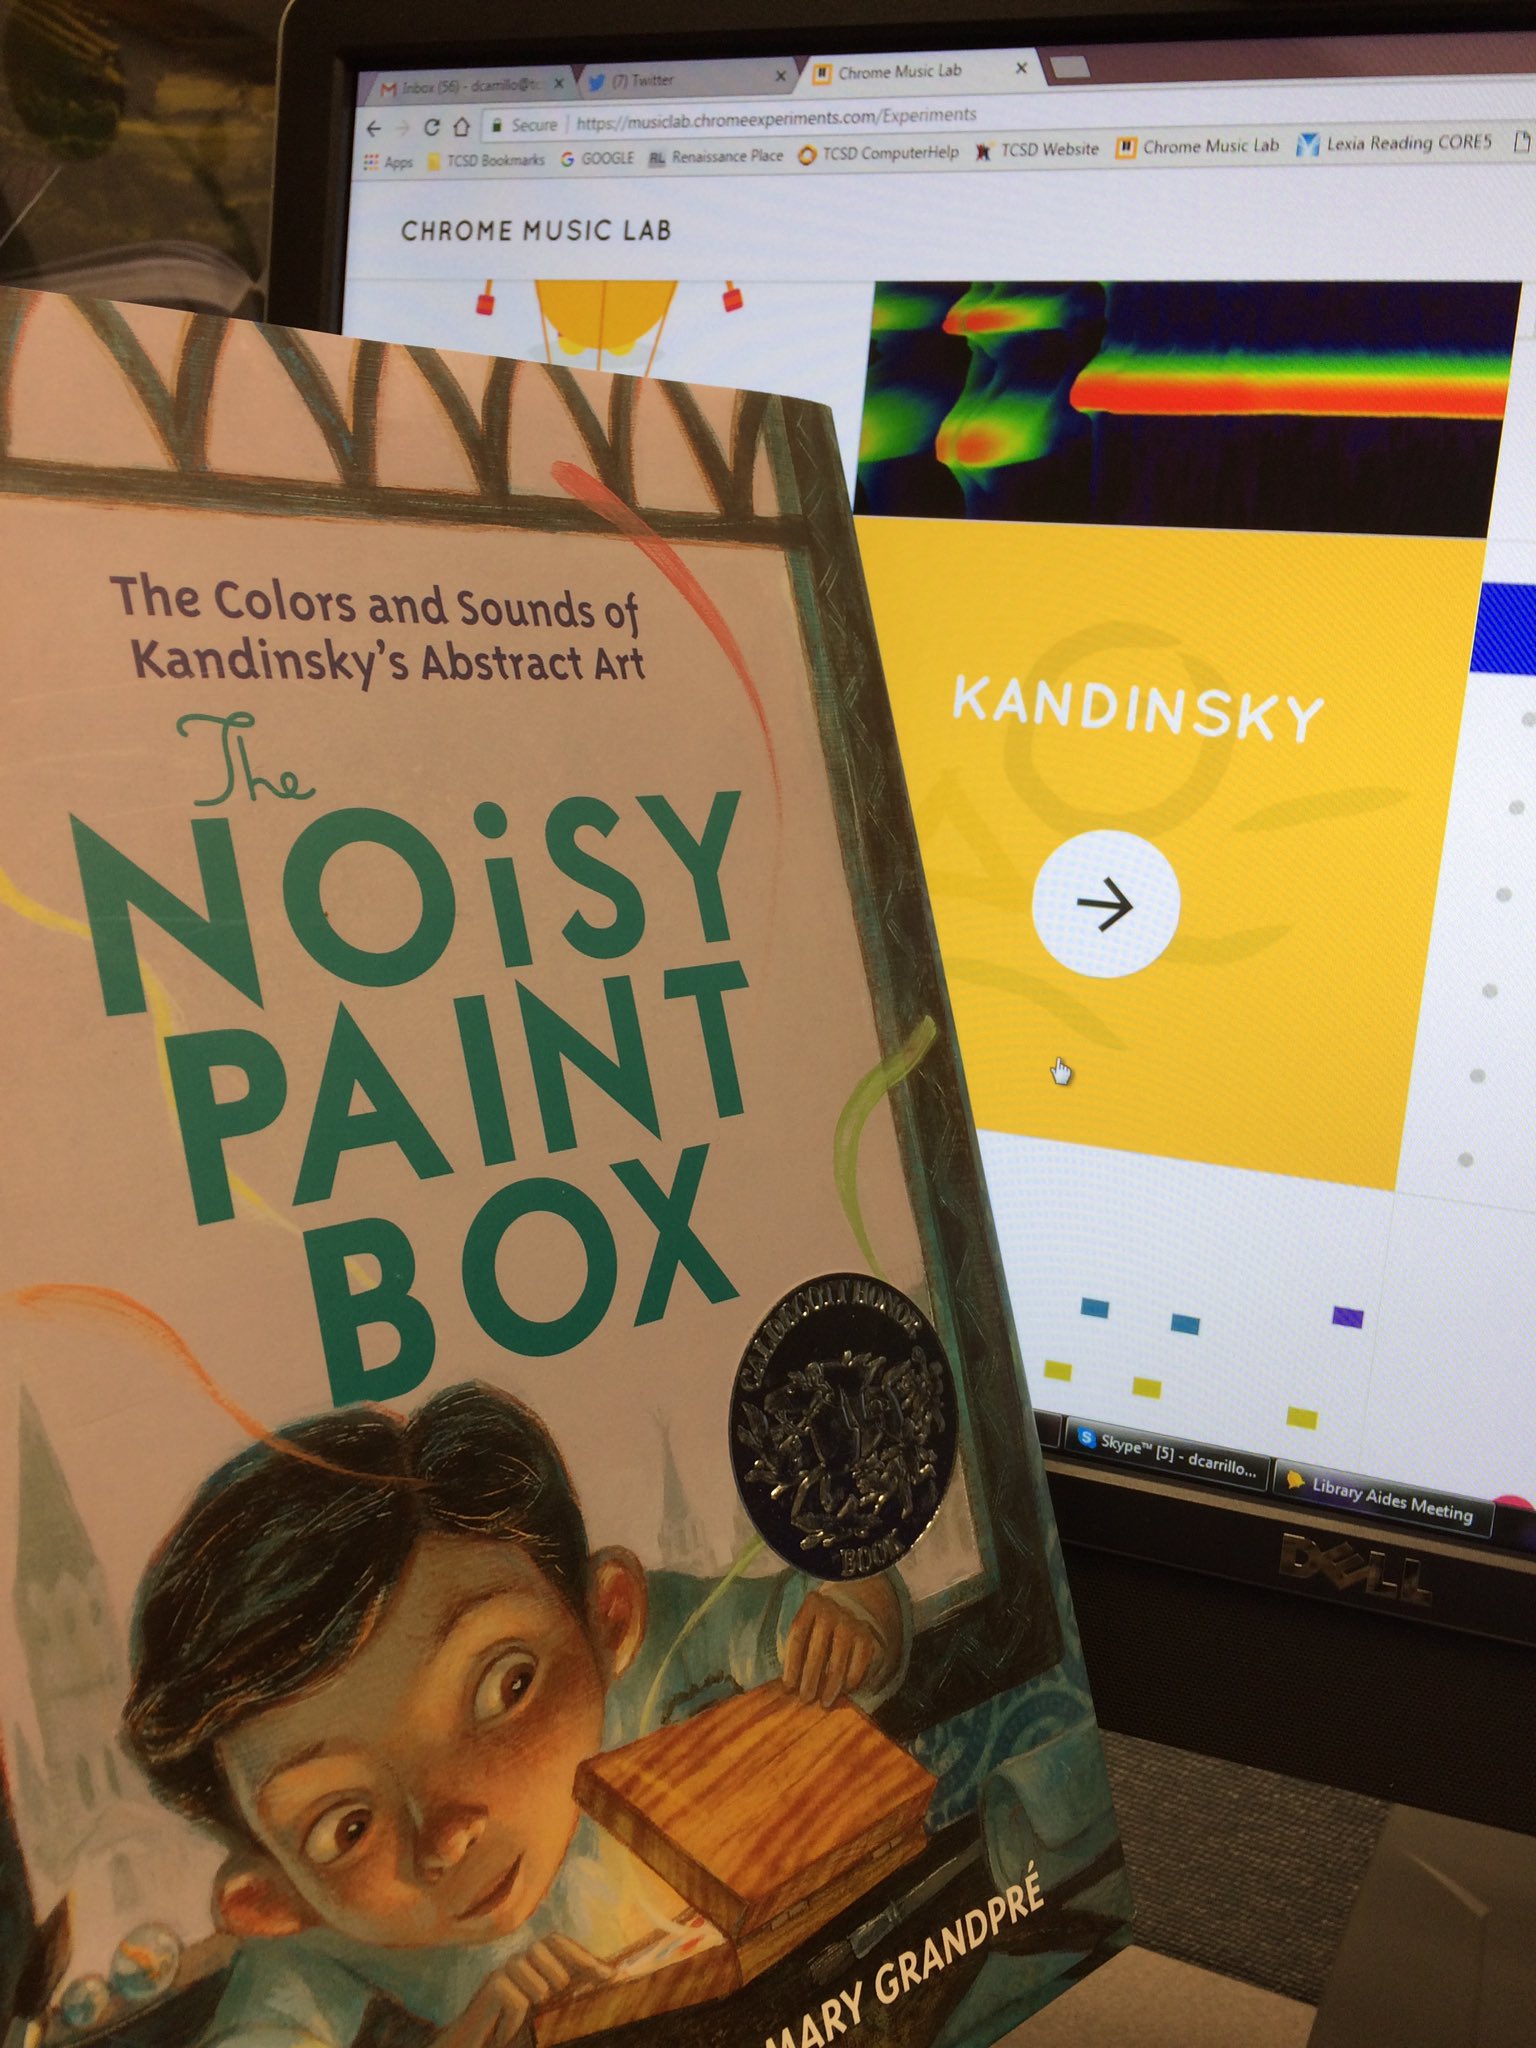 The Noisy Paint Box: The Colors and Sounds of Kandinsky's Abstract Art [Book]